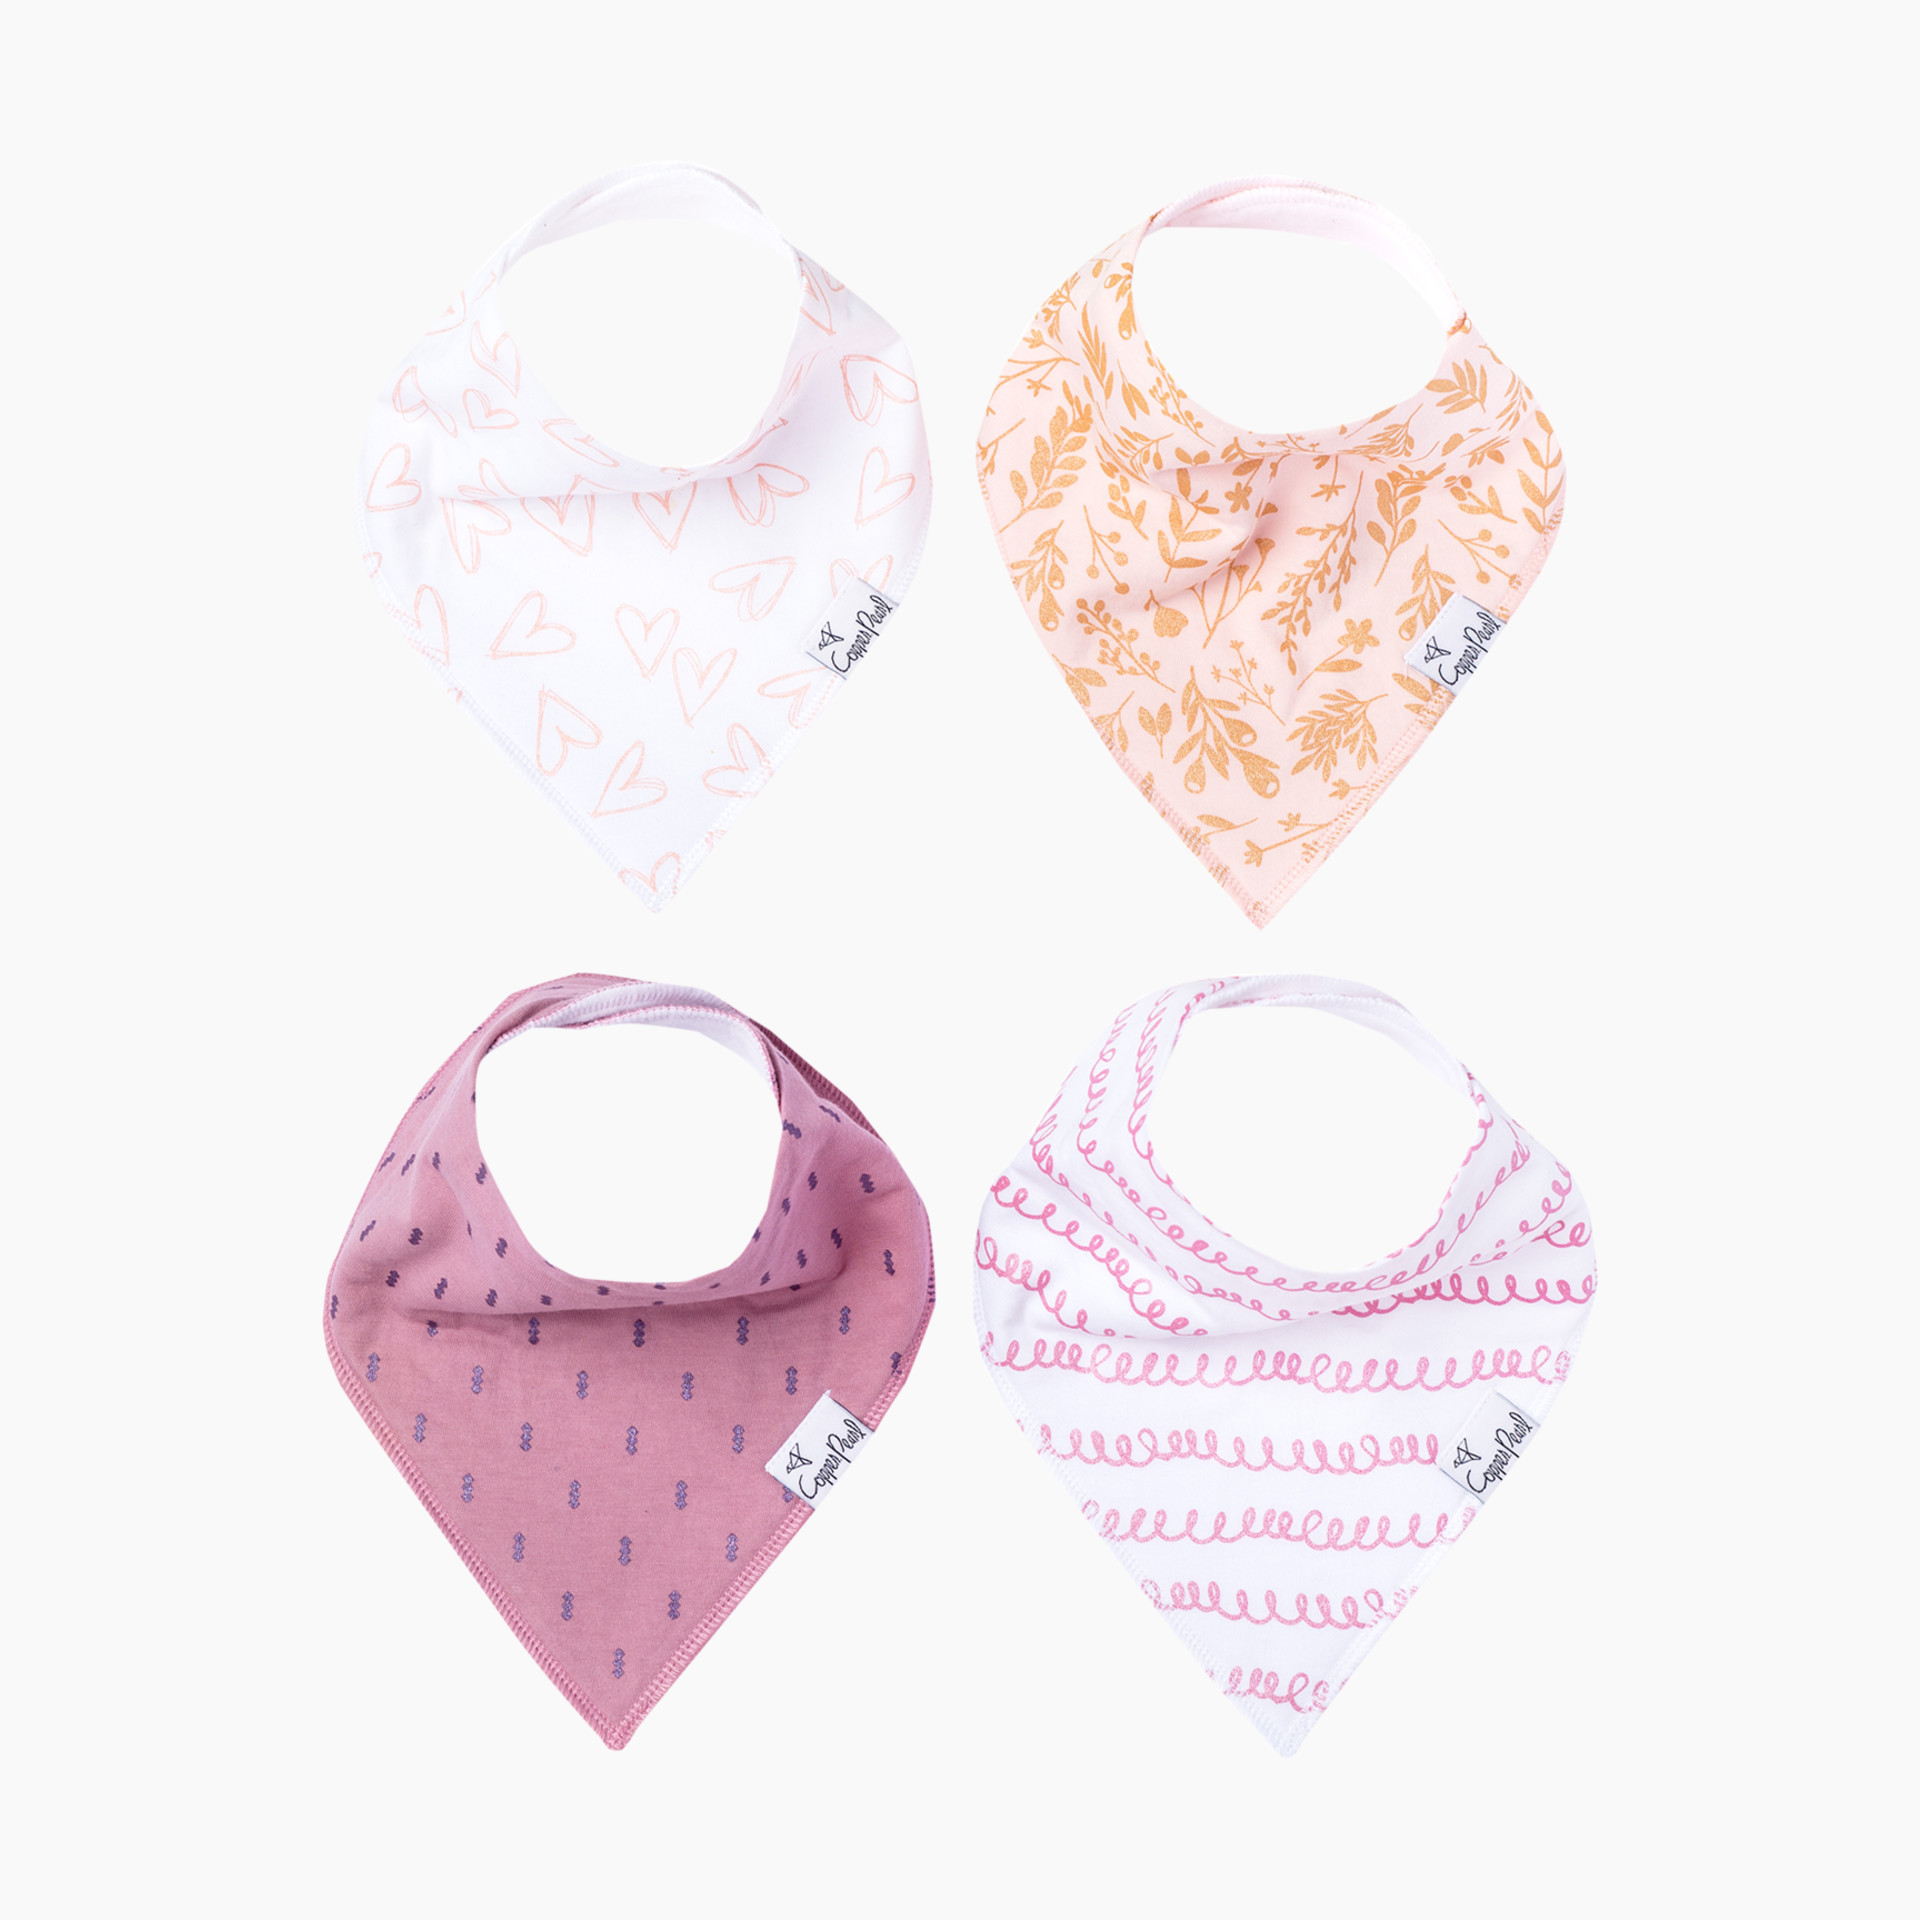  Copper Pearl Baby Bandana Drool Bibs for Drooling and Teething  4 Pack Gift Set Cruise, Soft Set of Cloth Bandana Bibs for Any Baby Girl or  Boy, Cute Registry Ideas for